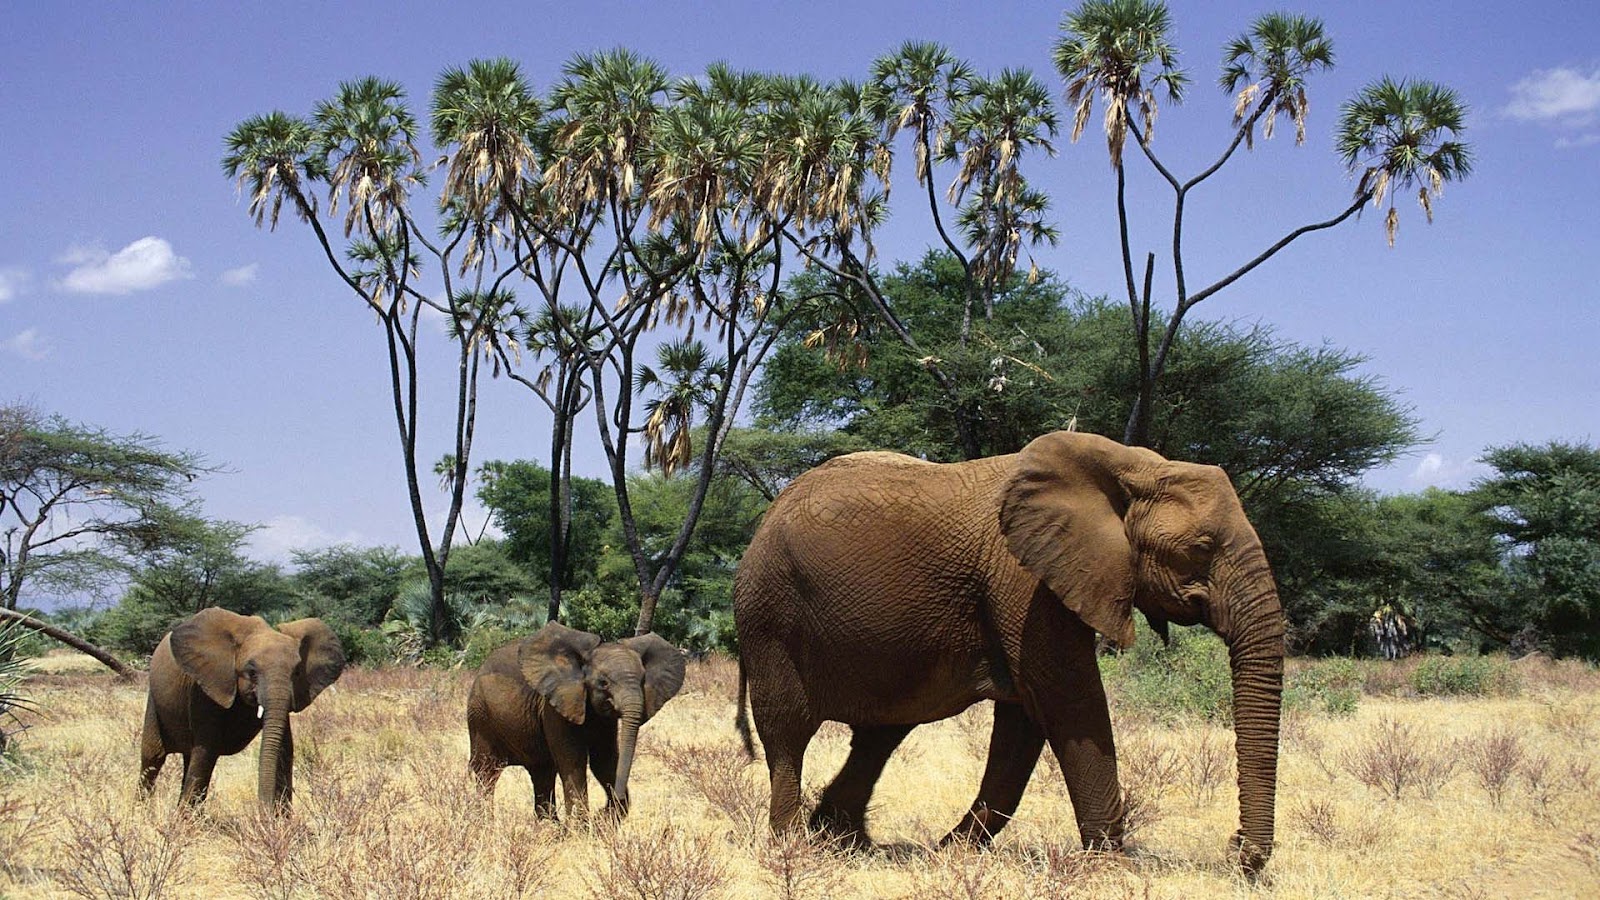  elephants wallpapers with mother elephant and his young elephants